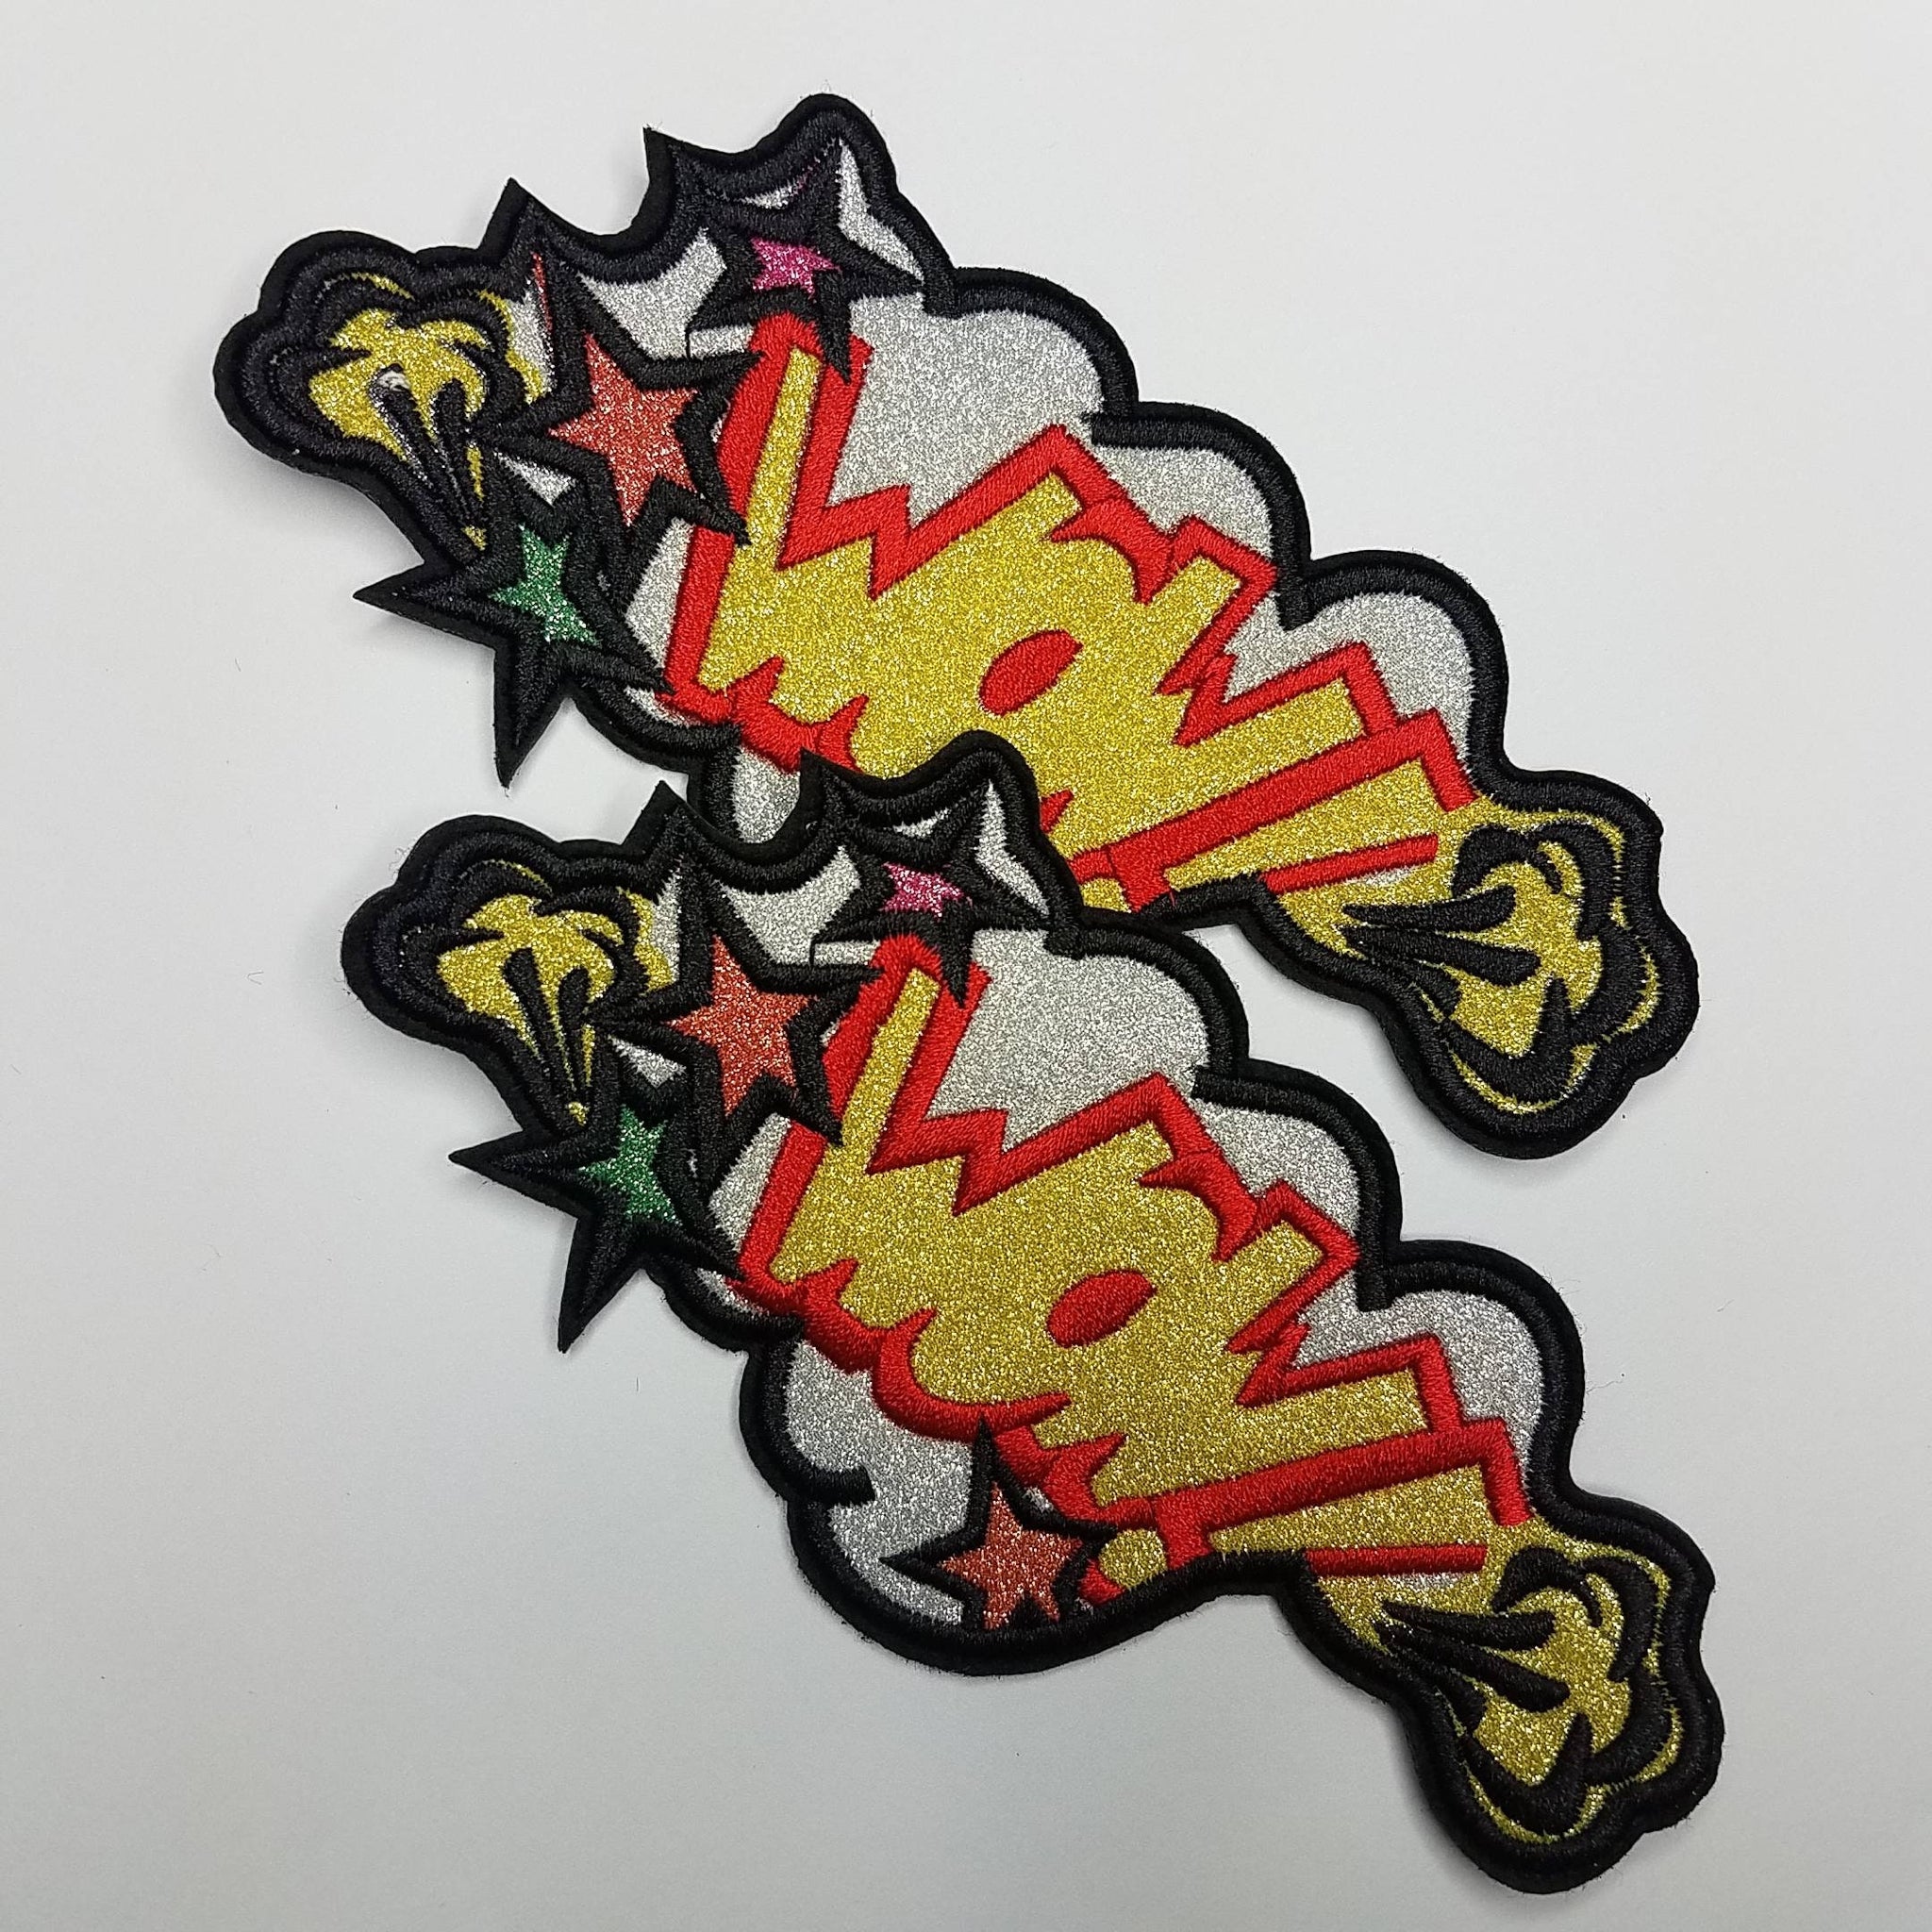 2-pc set, "Wow" Colorful Metallic Starburst Patch, 4"- inches, Cool Appliques For Clothing, Medium Size Fun Embroidered Patches